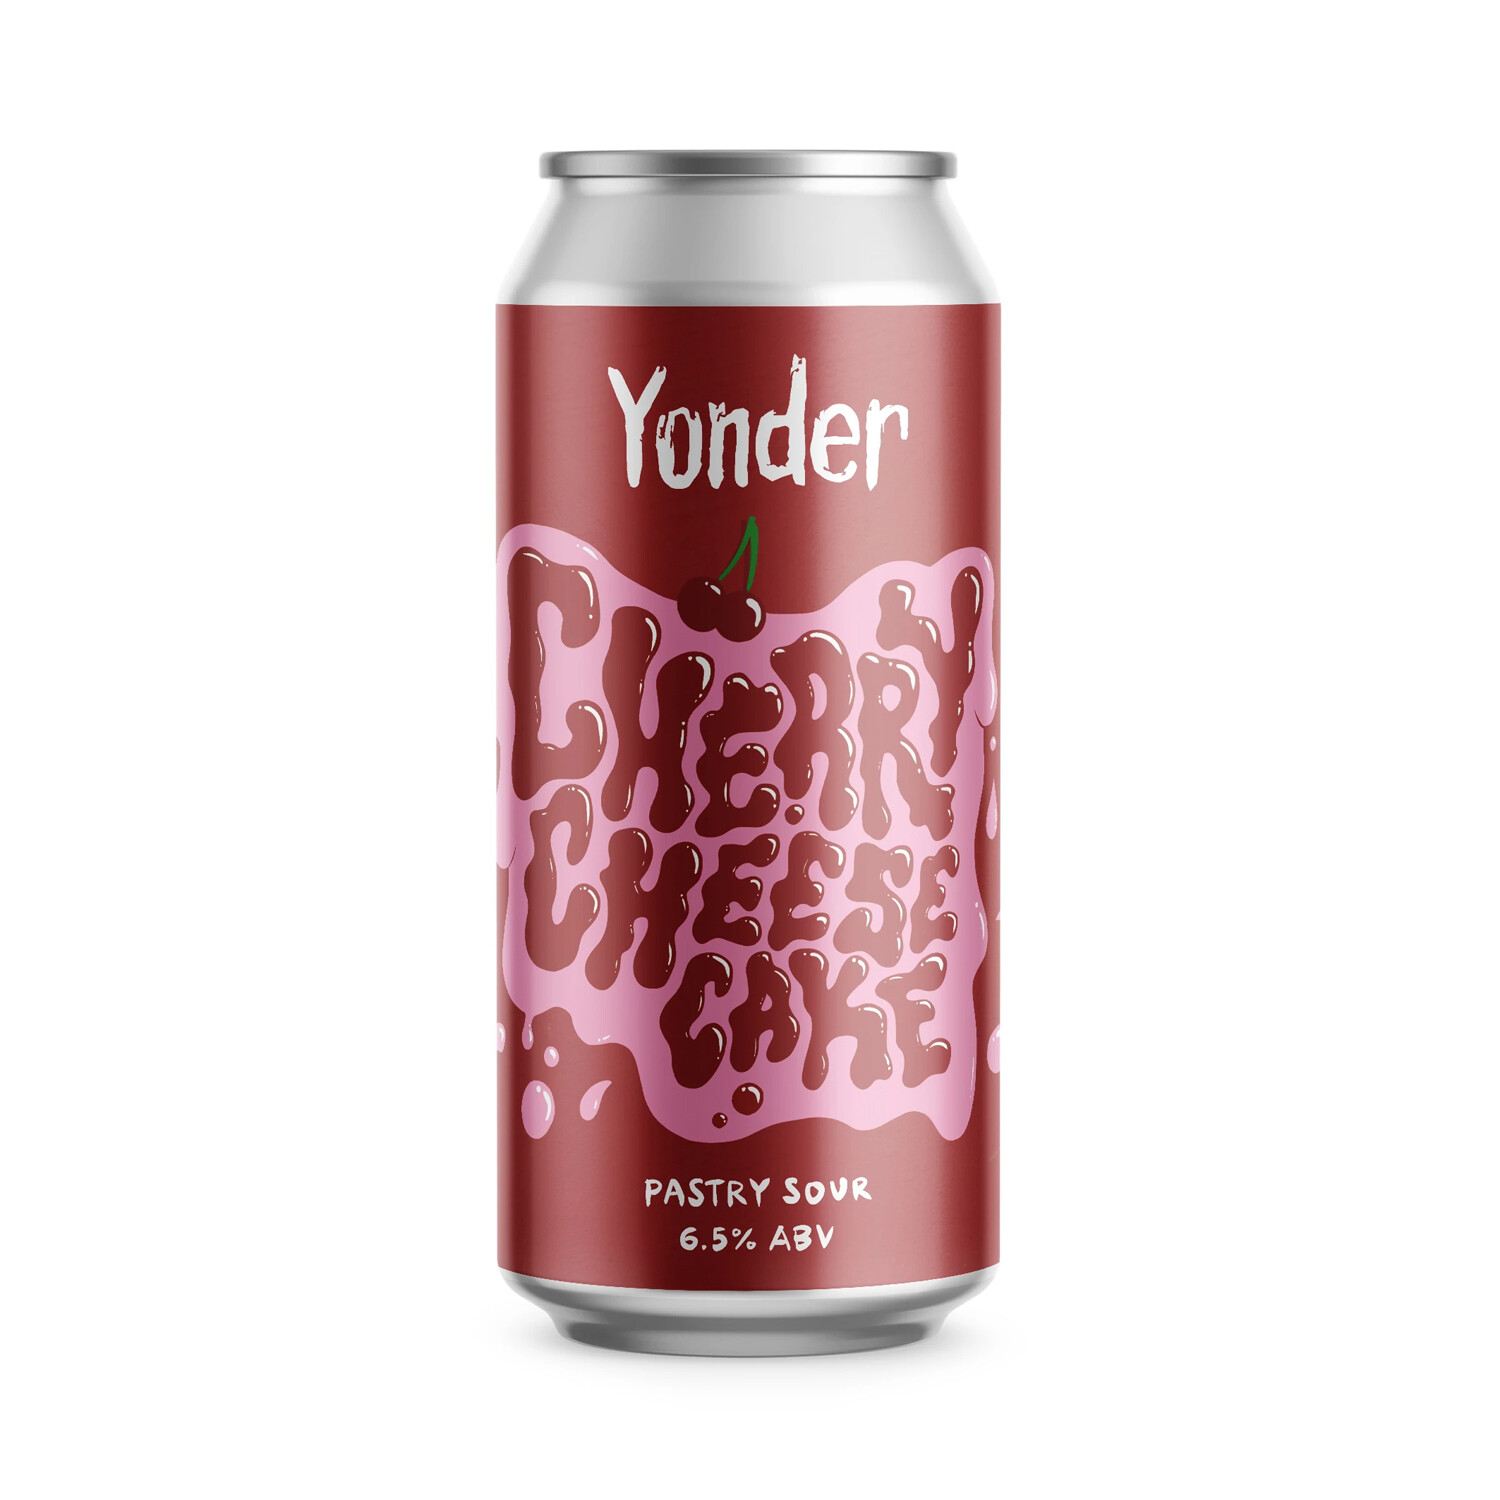 Yonder Cherry Cheesecake Pastry Sour